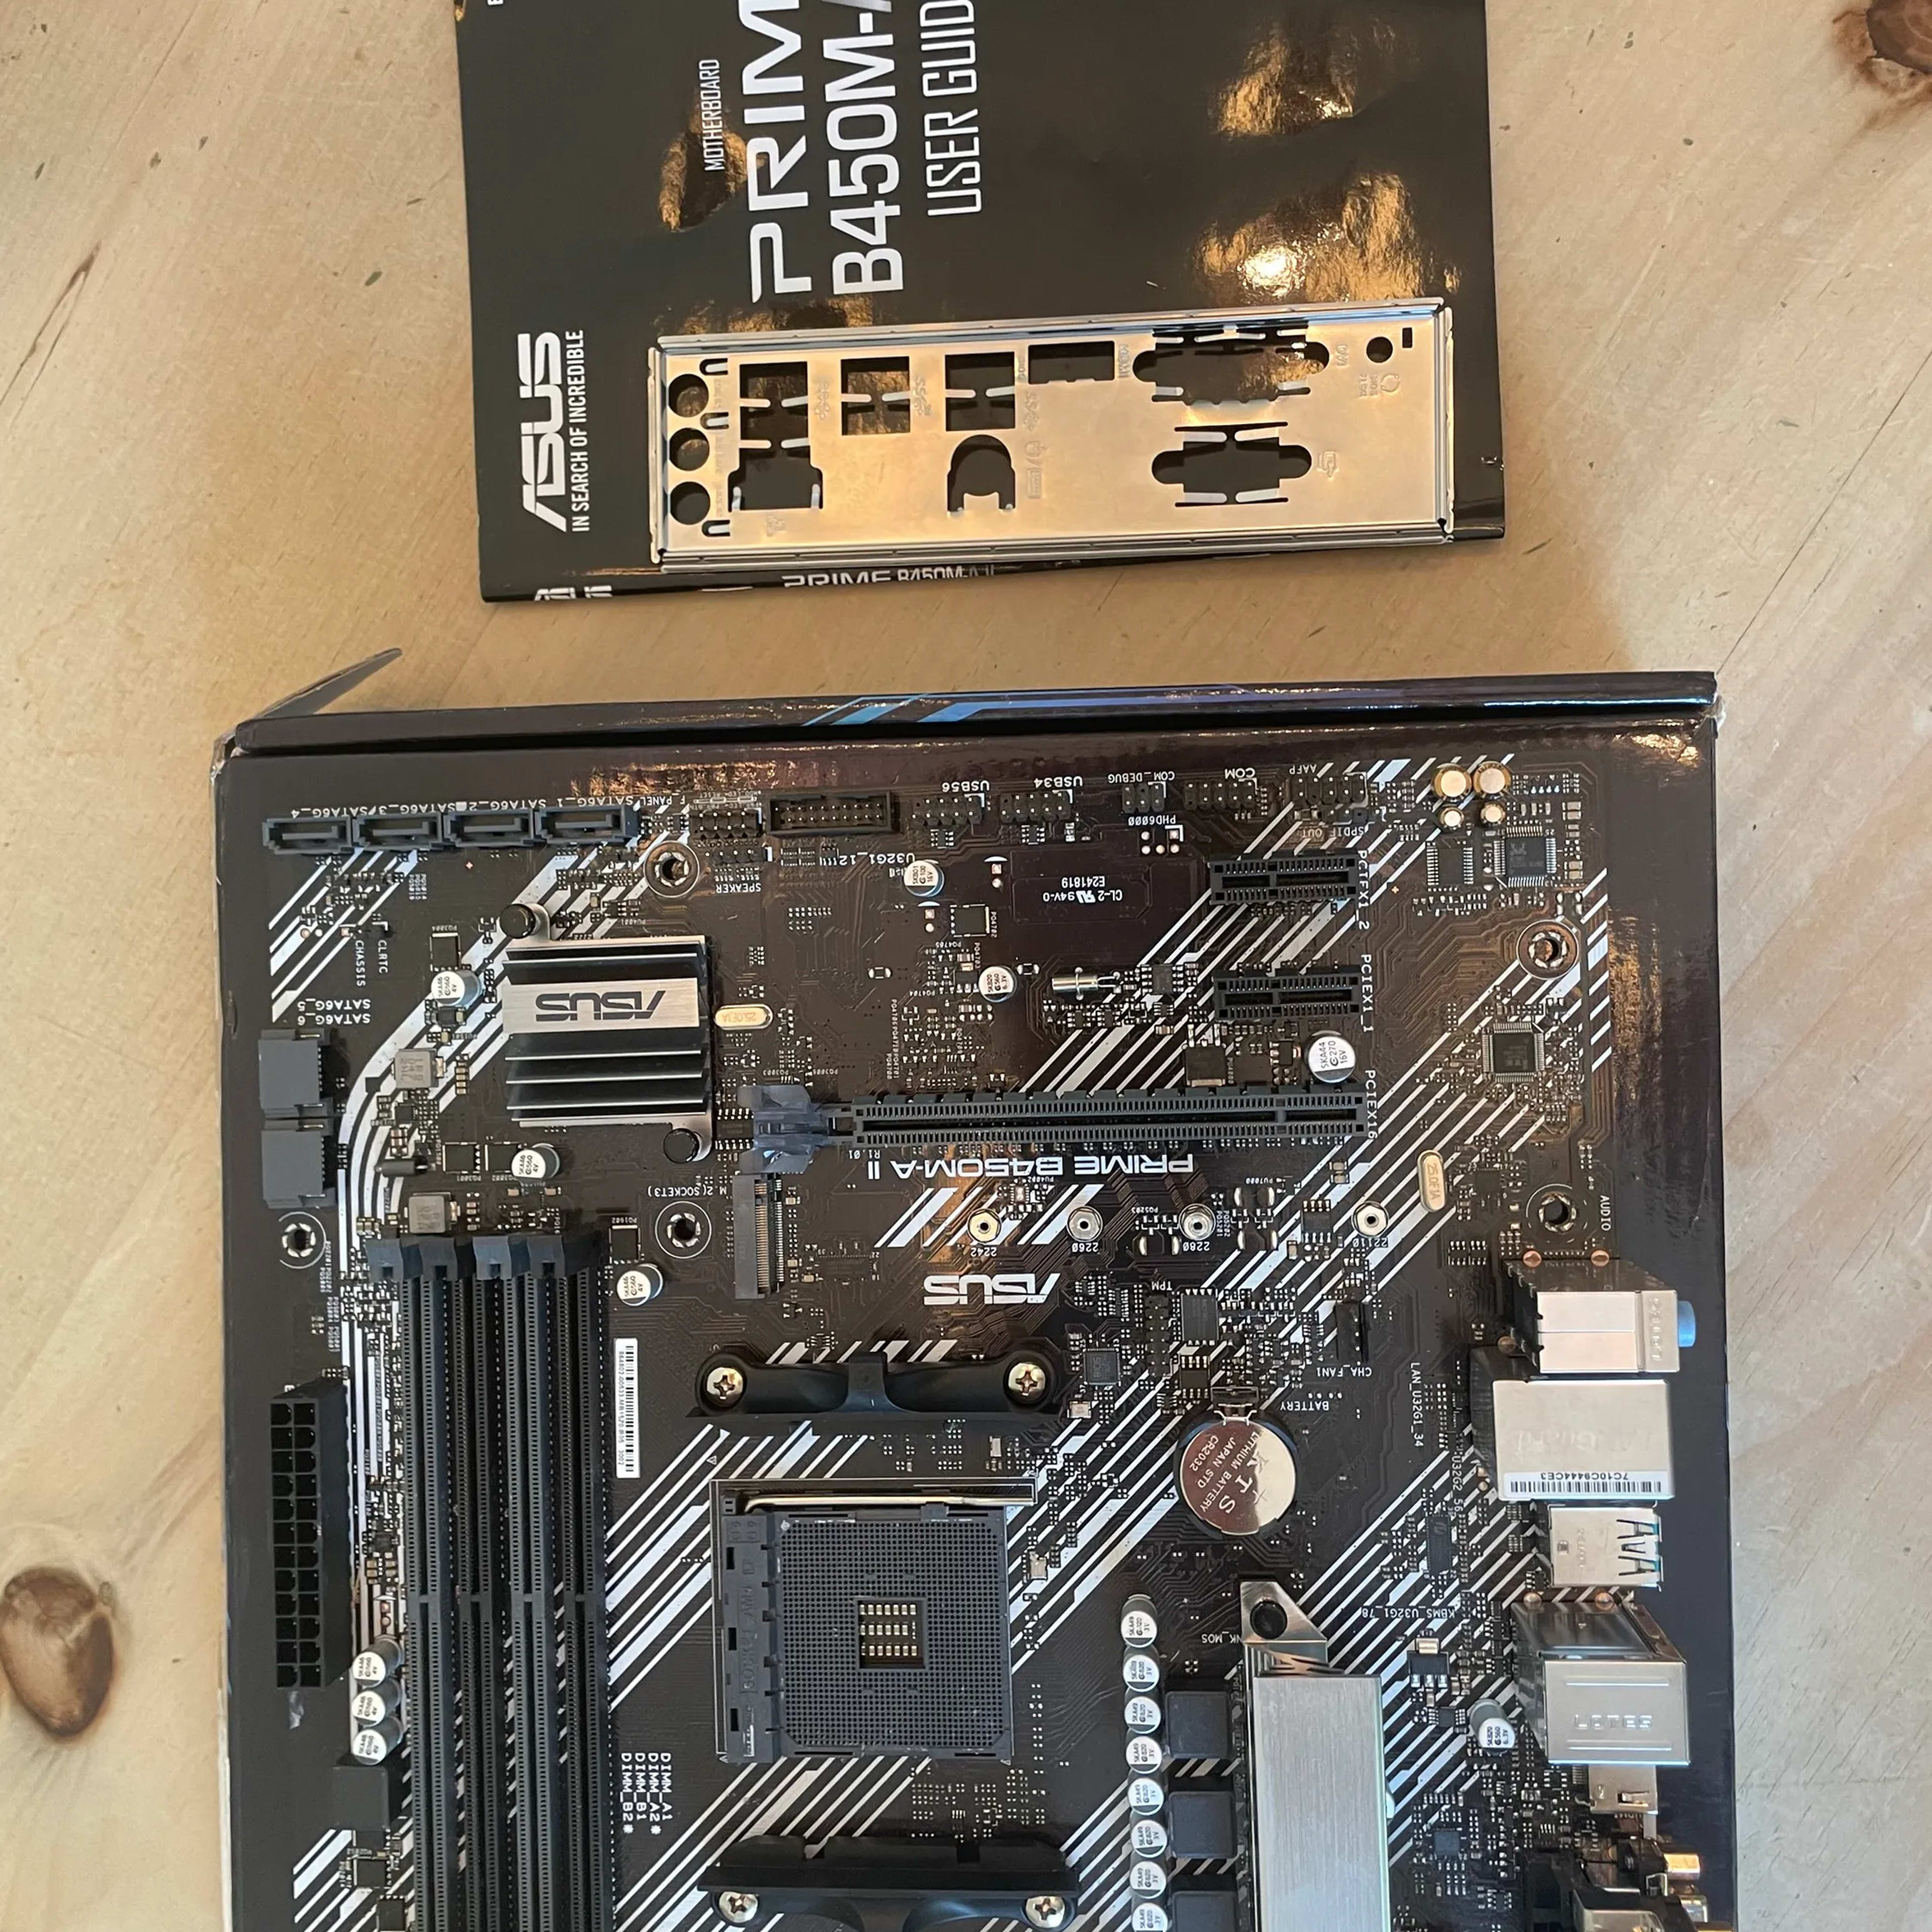 *For Parts* ASUS Prime B450M-A II Motherboard